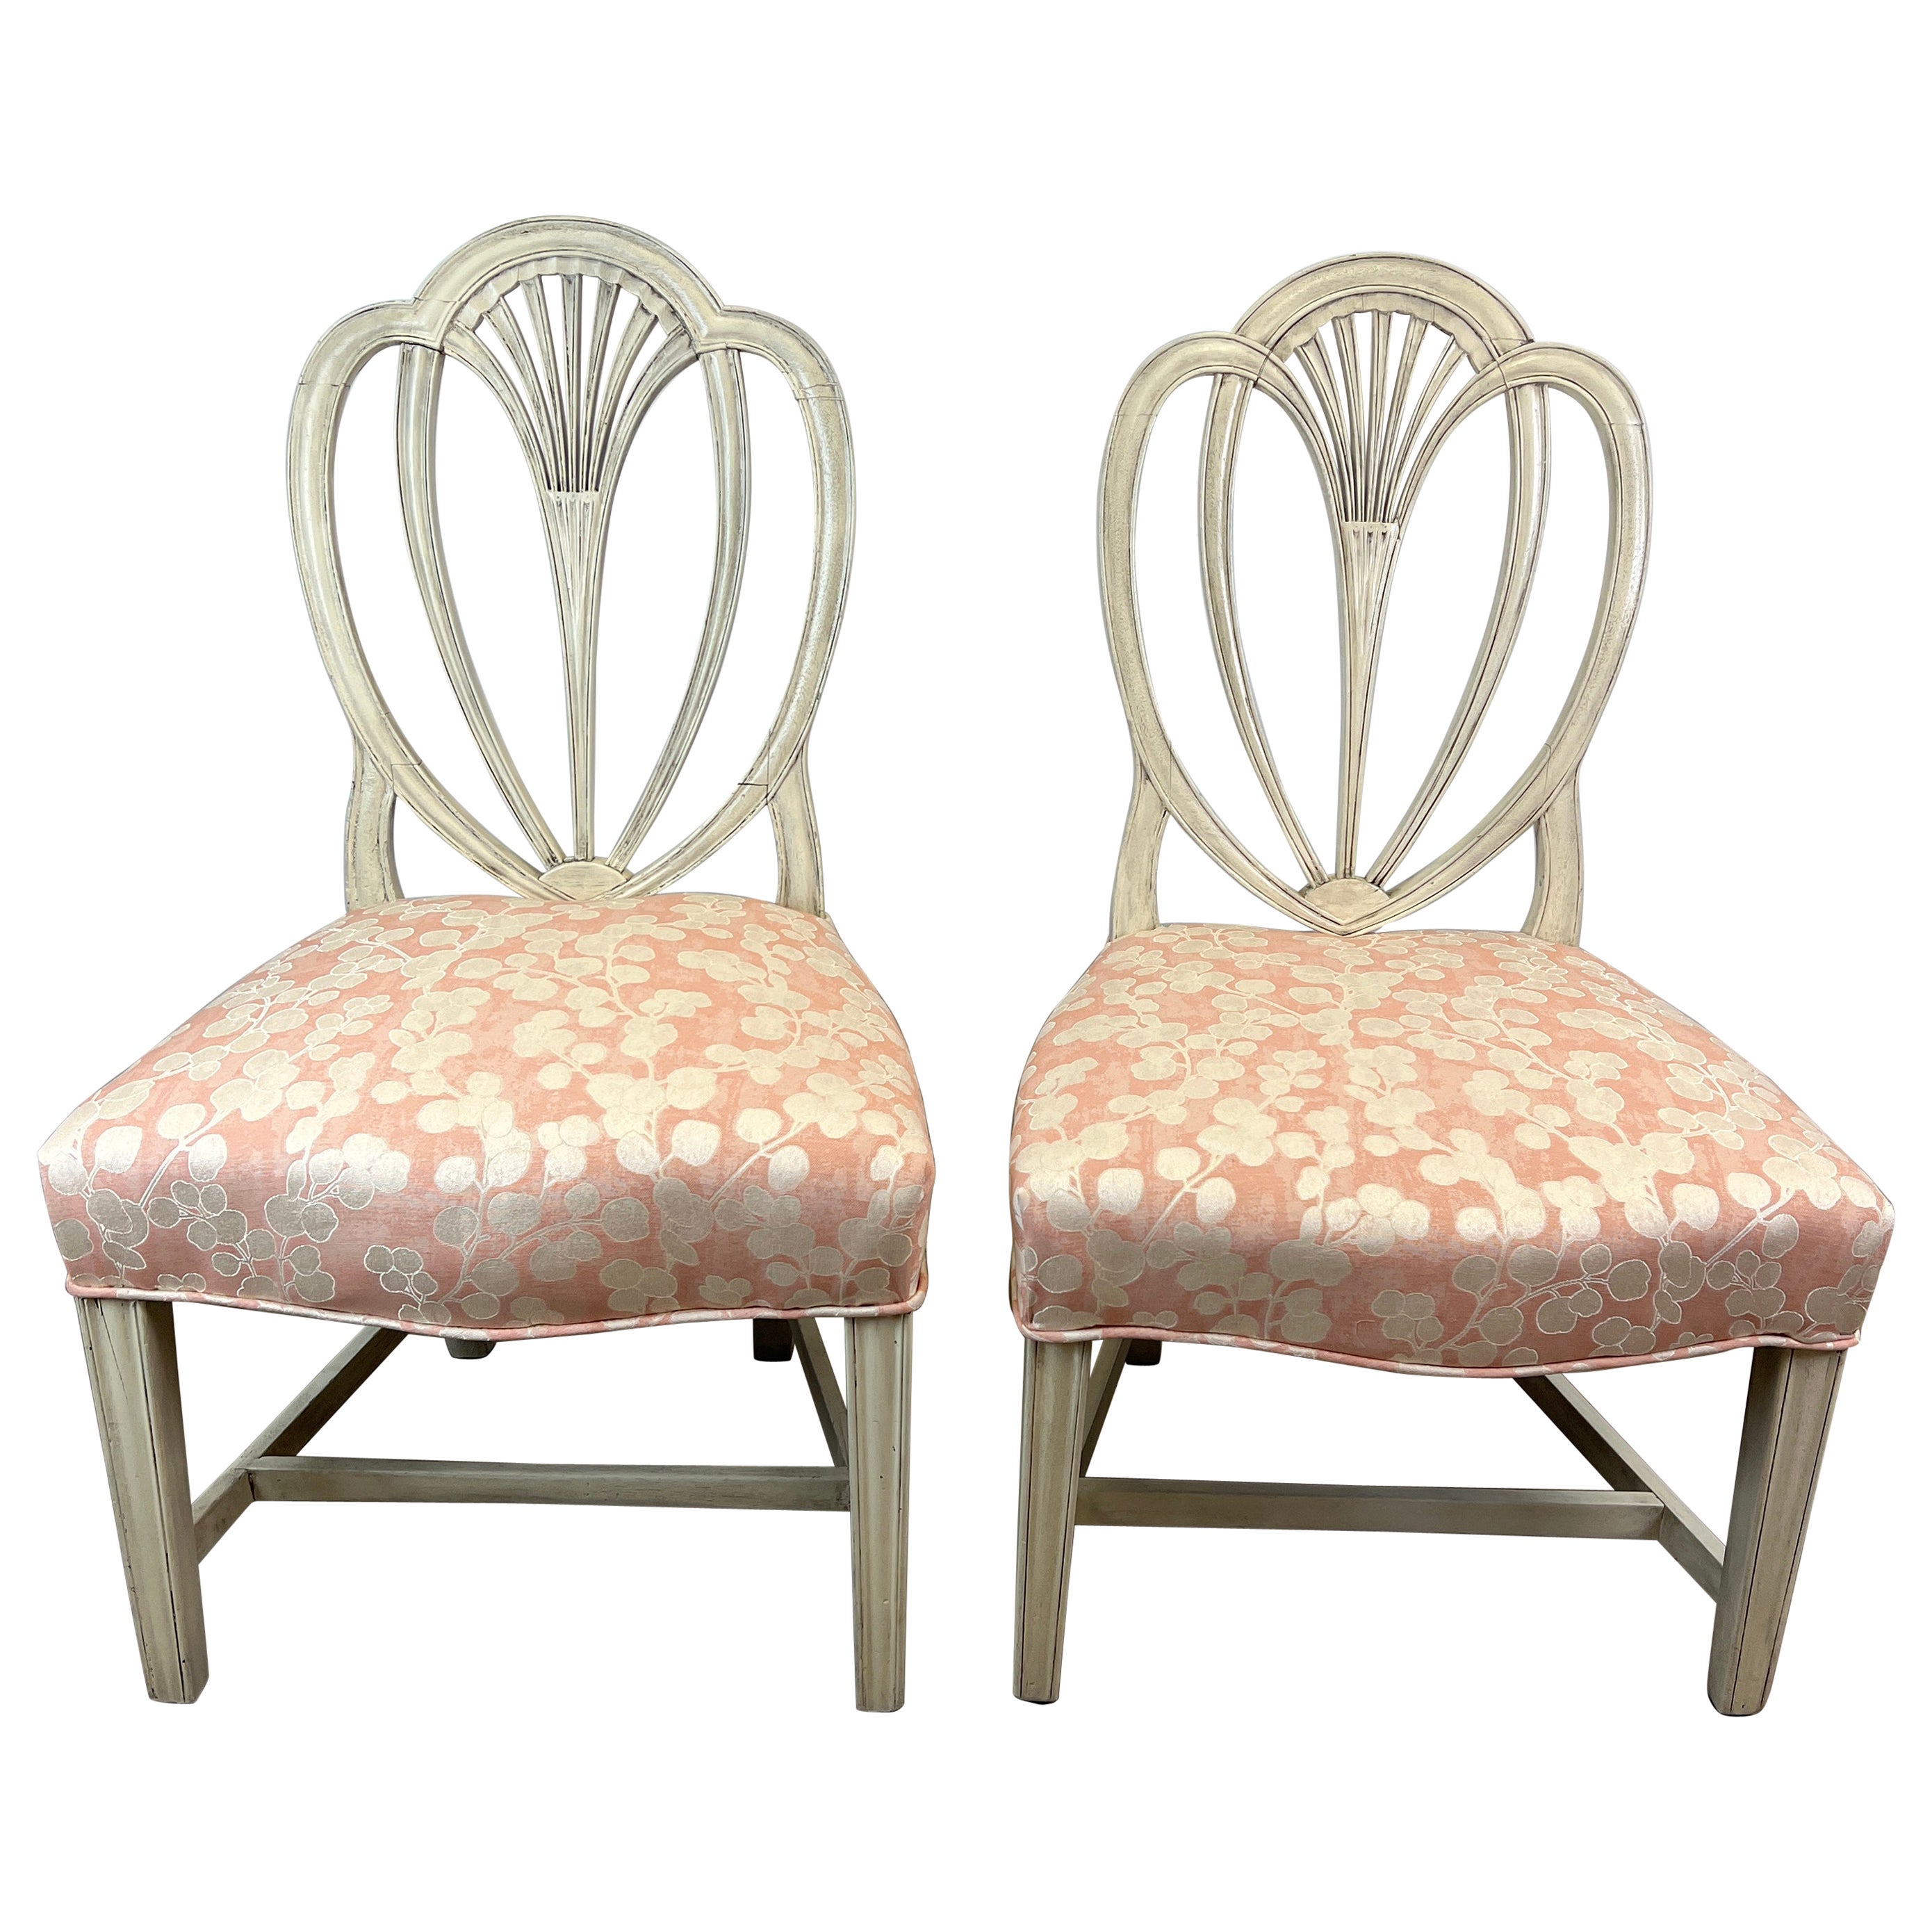 Pair of 18th Century American Mid-Atlantic Hepplewhite Arched Back Side Chairs For Sale